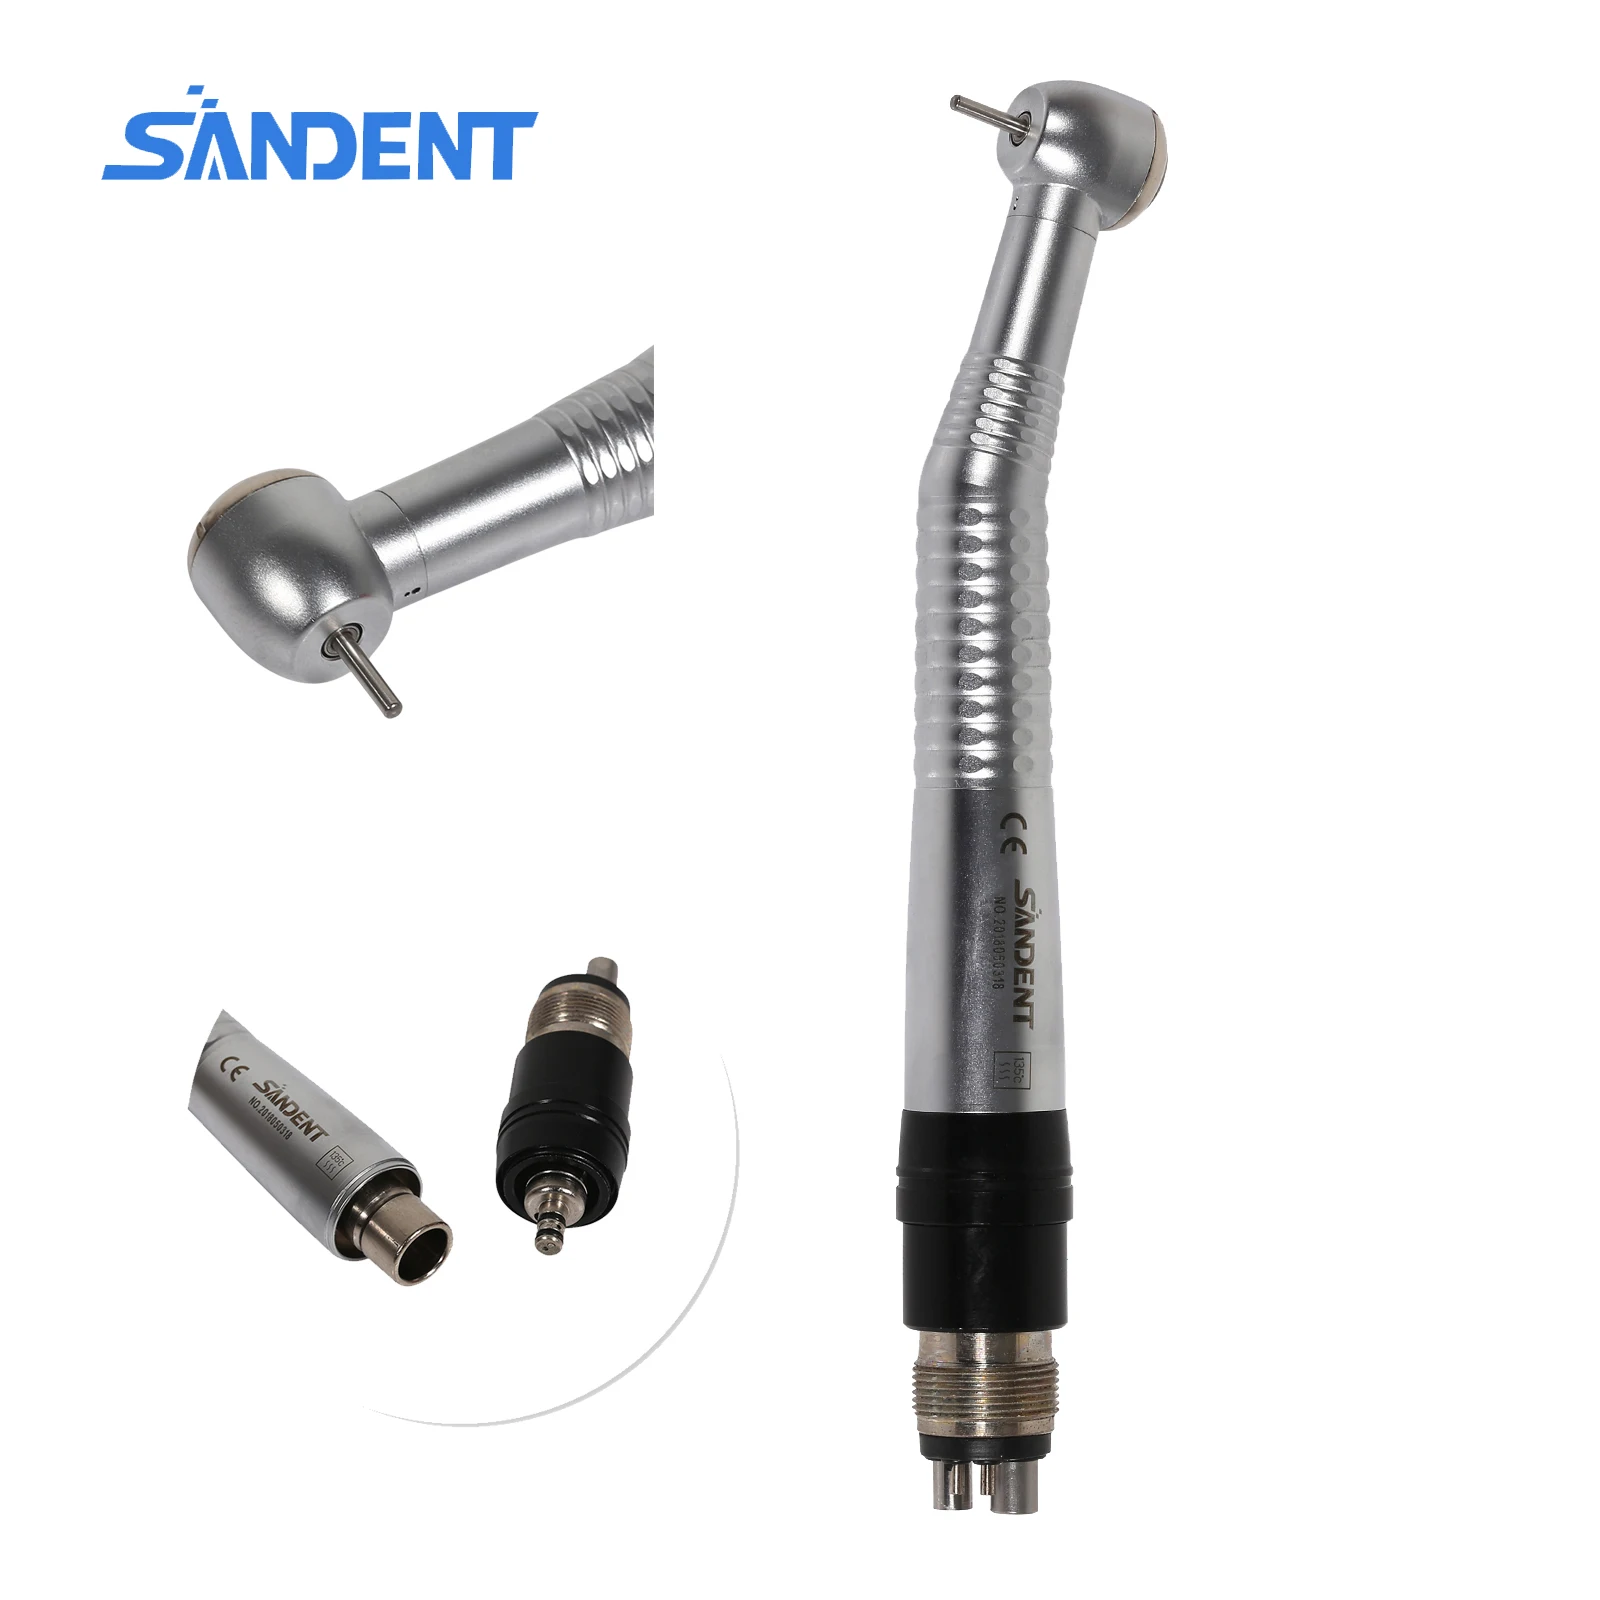 

SANDENT Dental Drill 4 Hole Single Water Spring Large Head High Speed Hand piece Push Button With 4 Hole Coupler Fit NSK QD-J